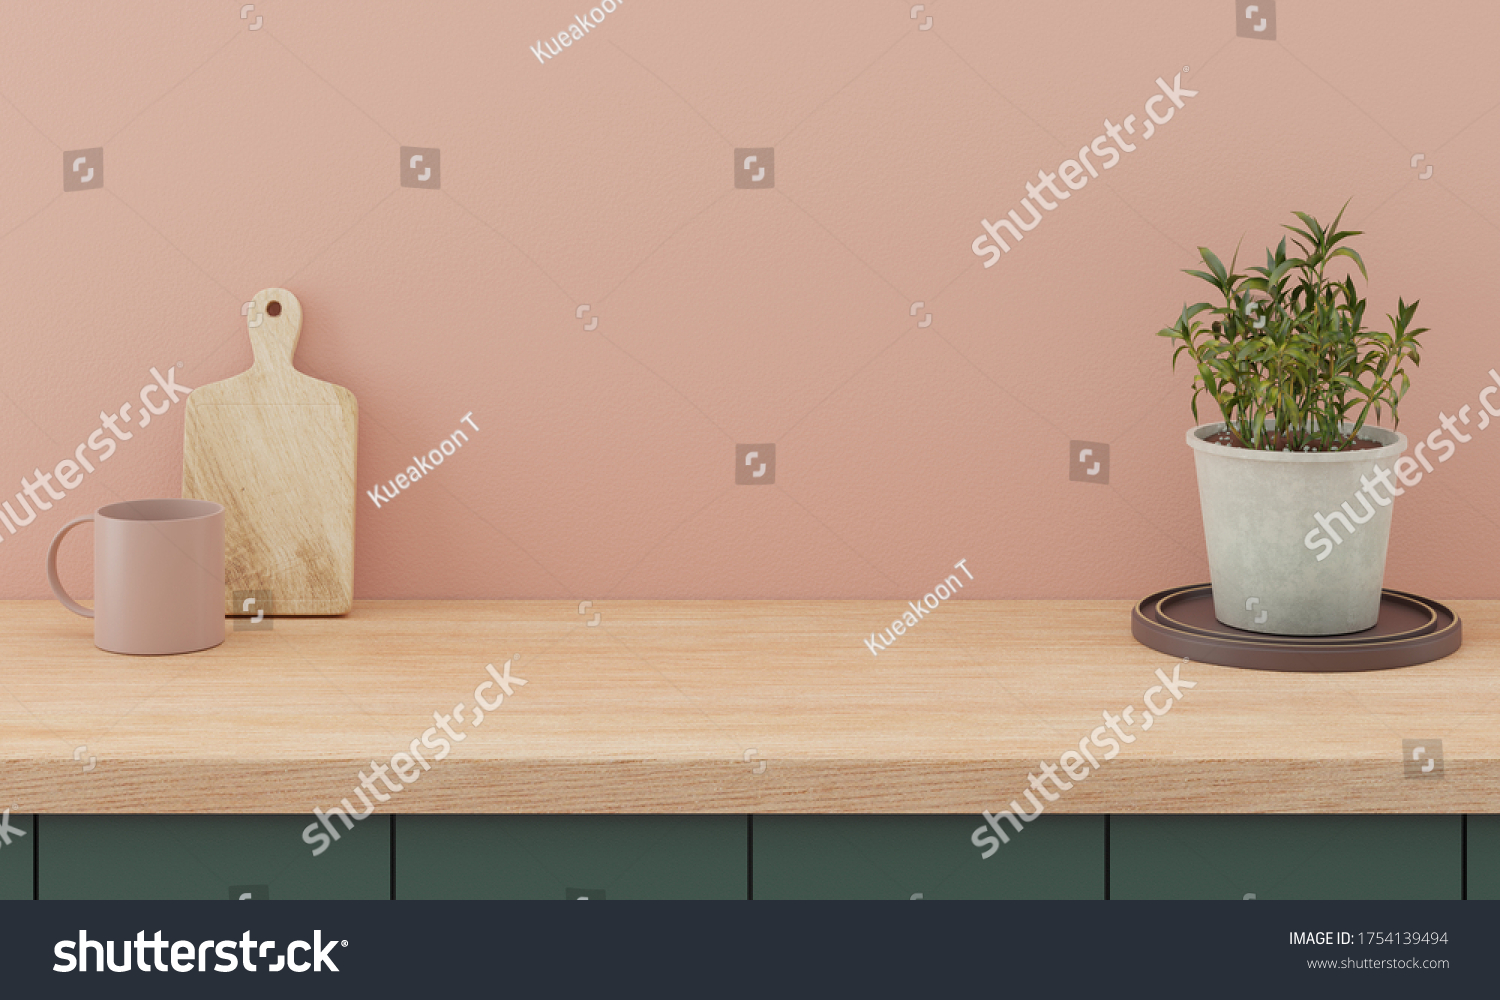 Minimal kitchen interior mock up design for product presentation background or branding concept with green counter bright wood top and pink wall include vase with plant chopping block and glass #1754139494